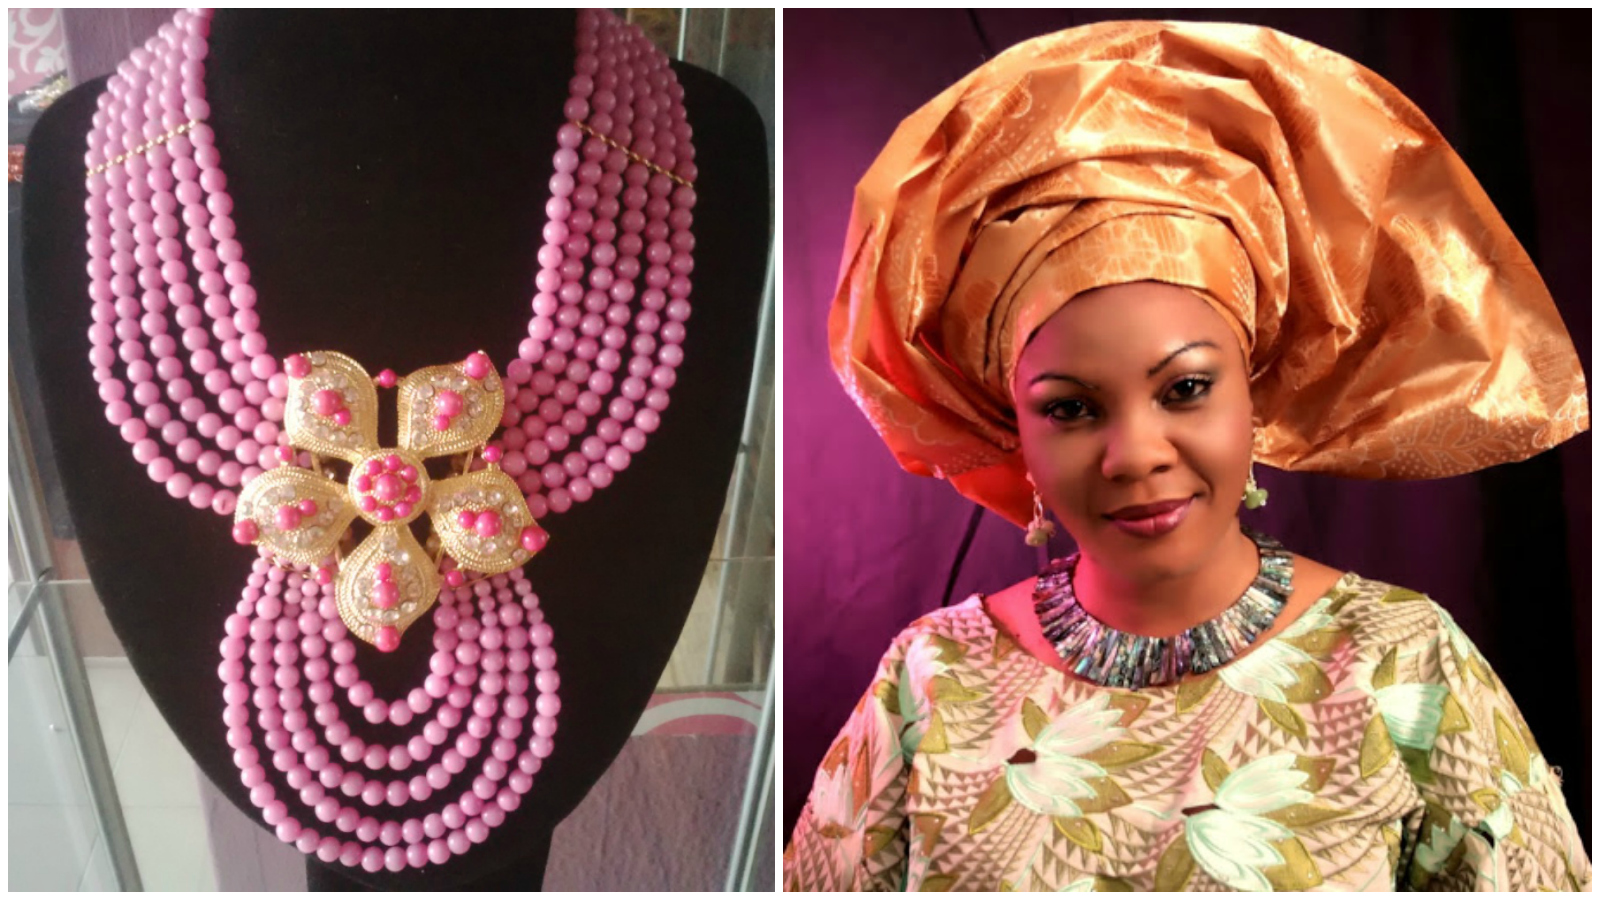   Abimbola Baolgun &nbsp;founder of Nigeria’s Bimbeads Concept&nbsp;is elevating the art of beading and creating the most spectacular pieces inspired by nature. Click to learn more. 